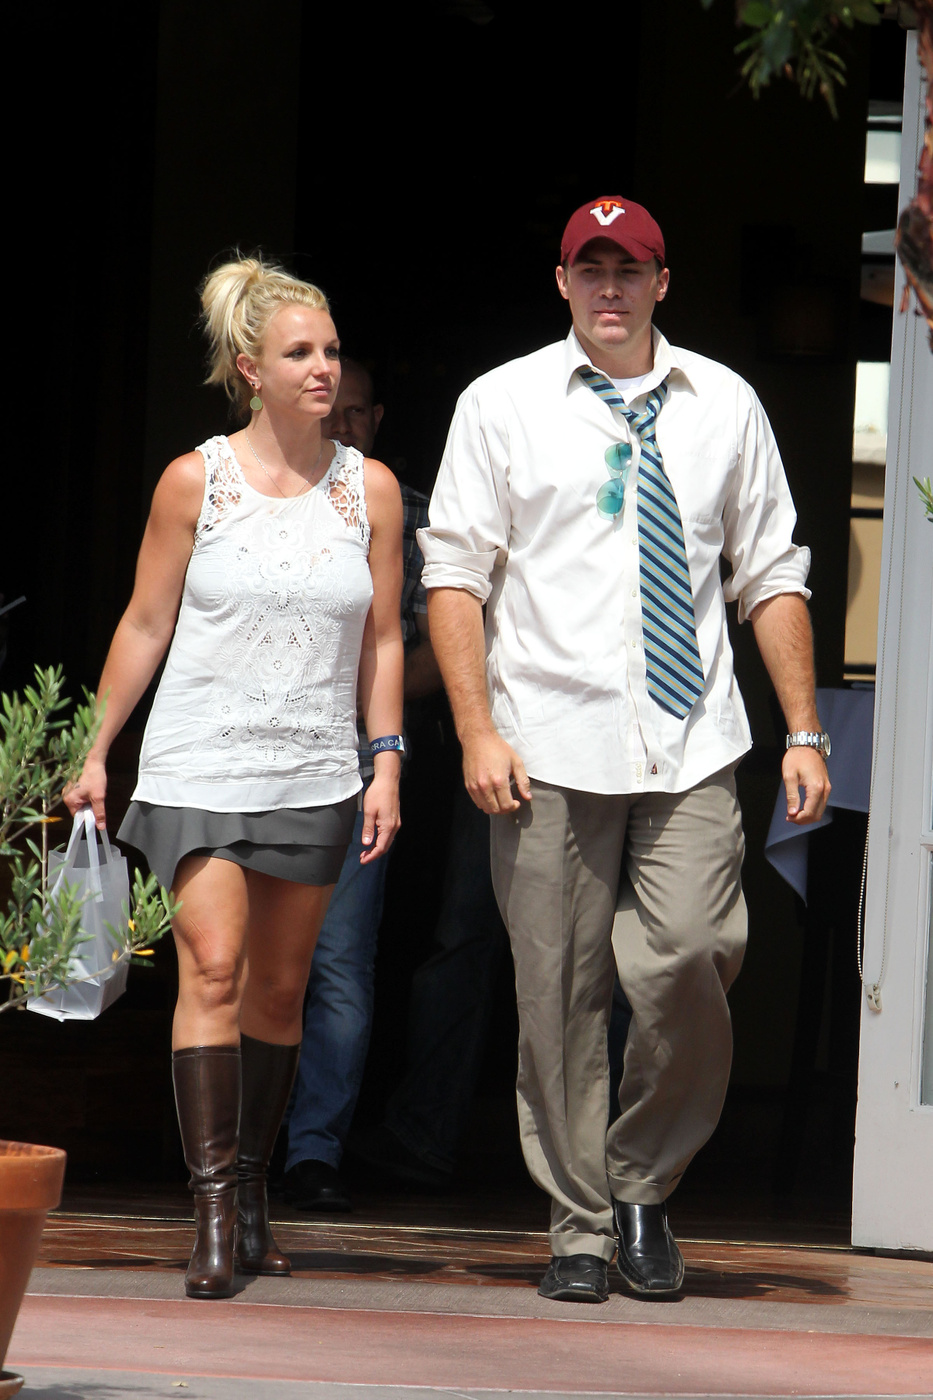 Britney Spears leaves the studio and goes shopping on Robertson Boulevard with her boyfriend David Lucado at The Napa Tavern in Los Angeles.